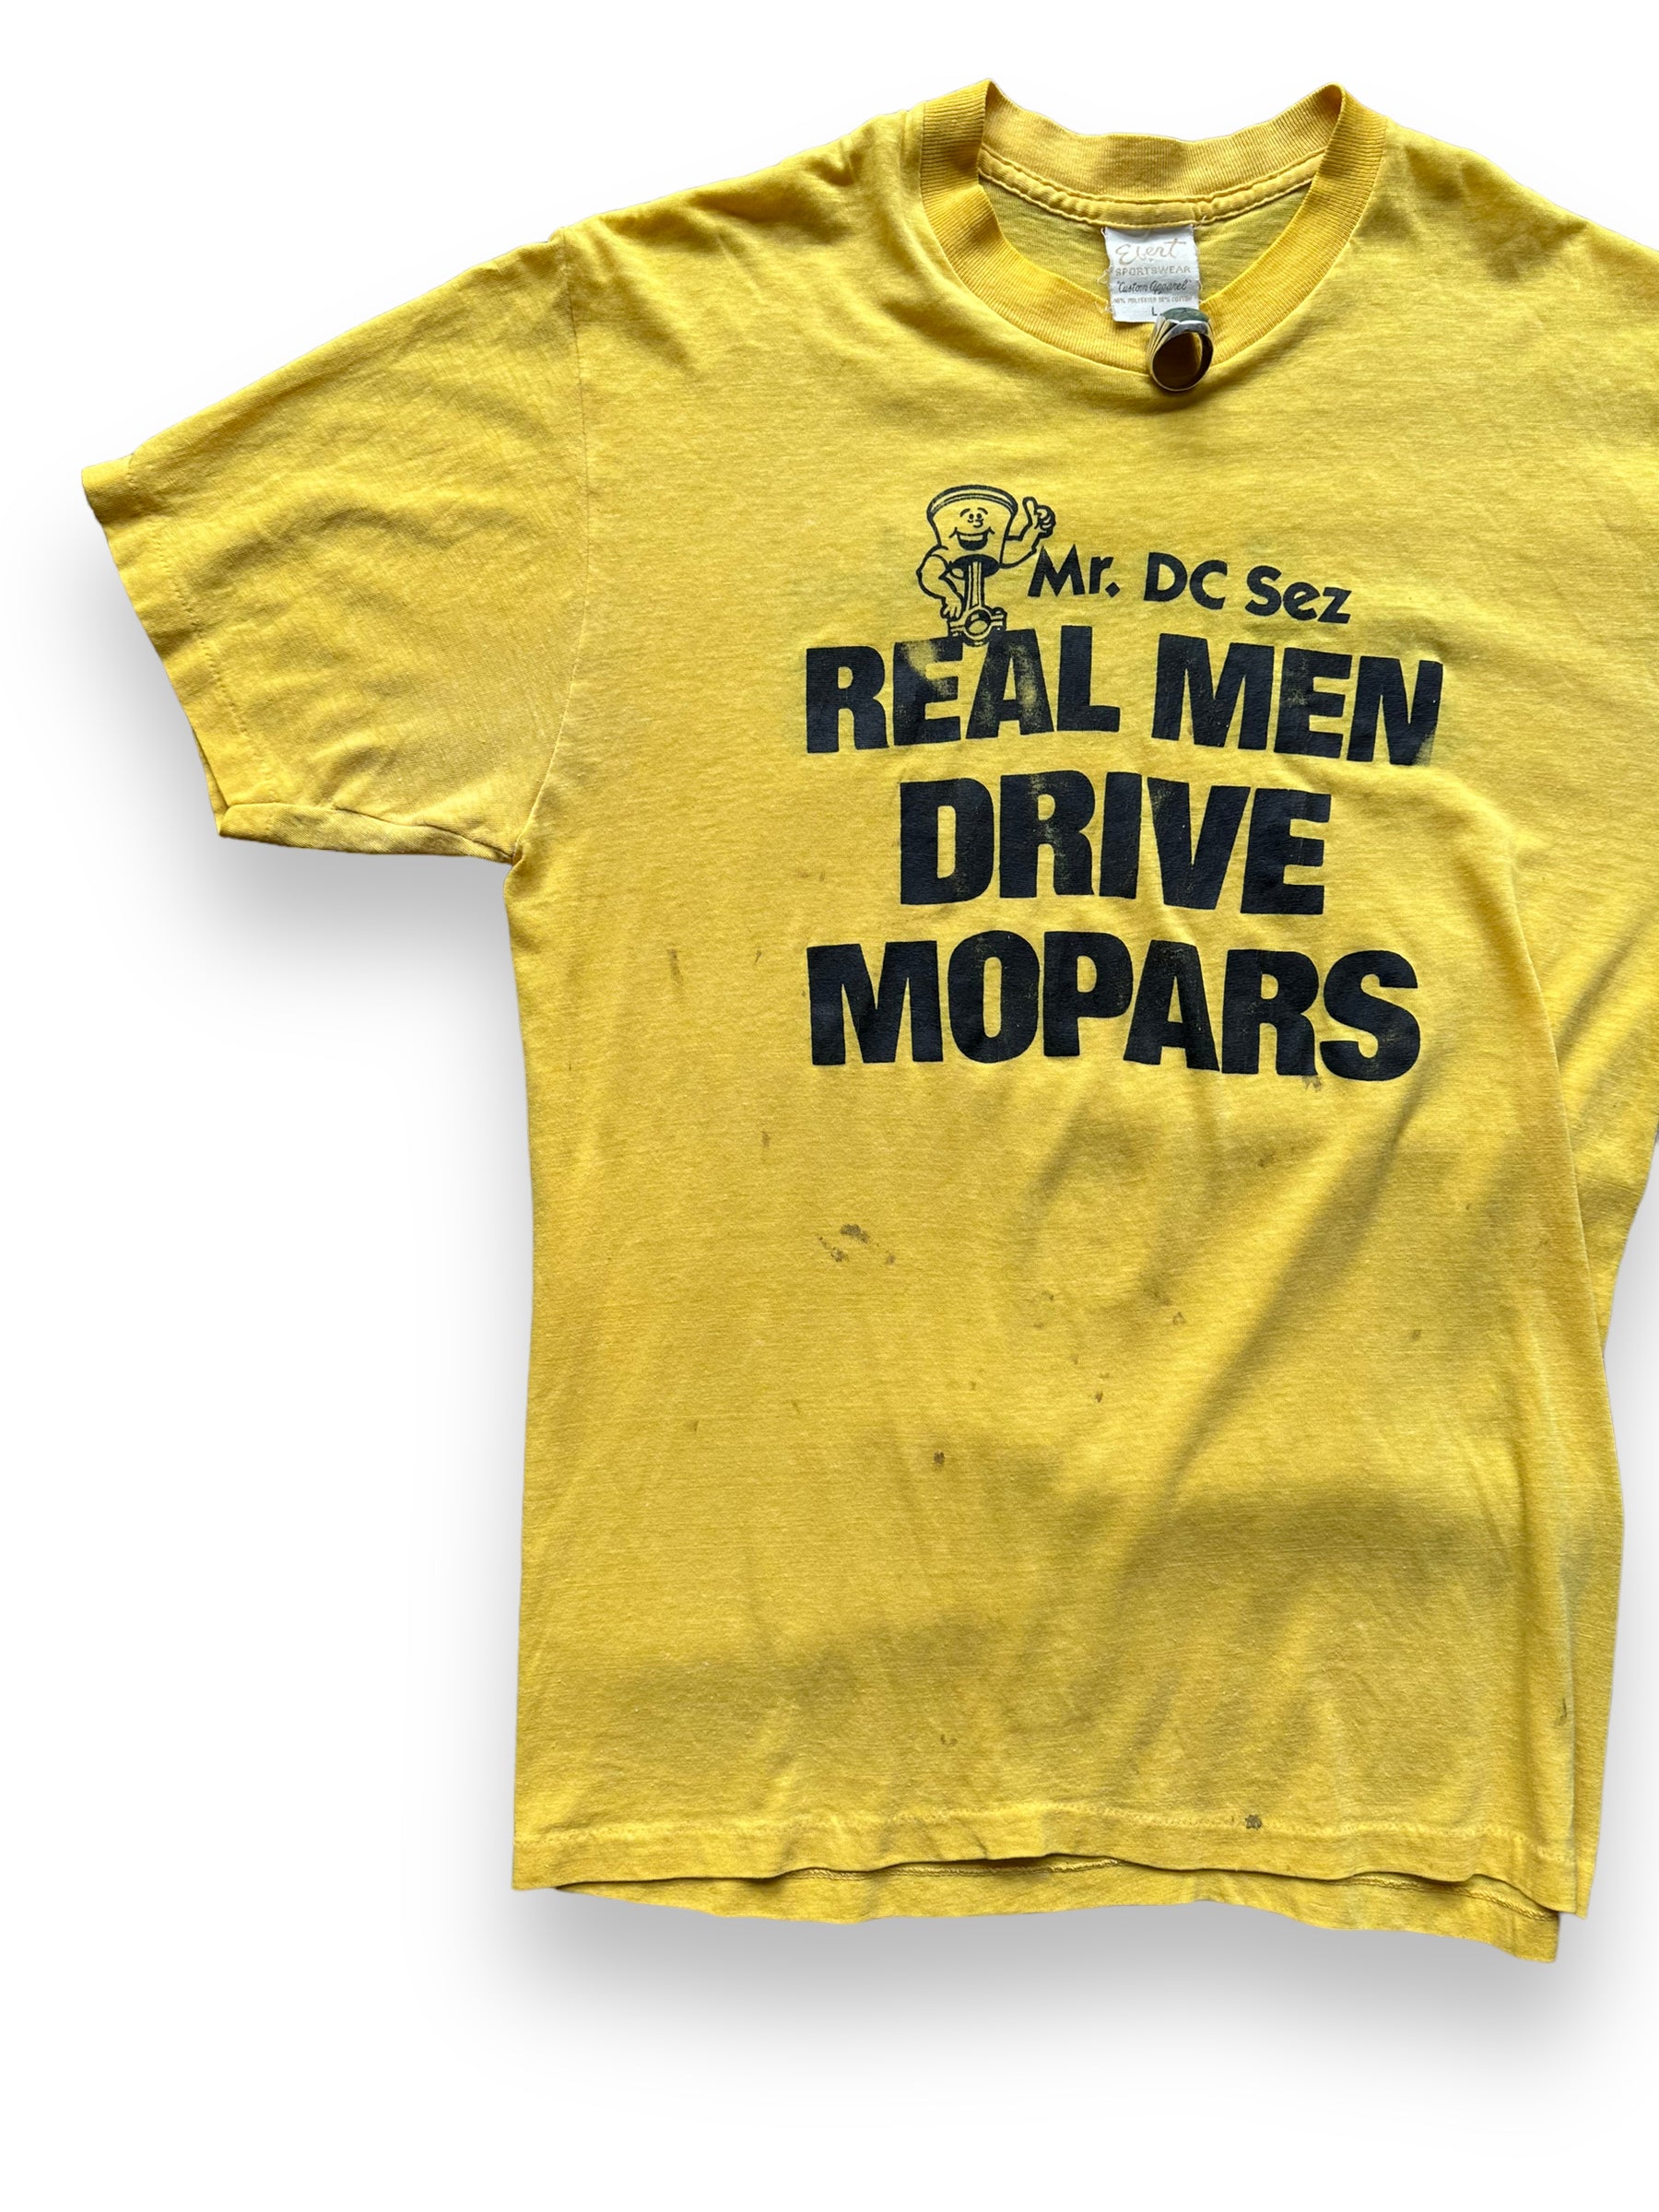 Front Right View of Vintage Real Men Drive Mopars Tee SZ L | Vintage Graphic T-Shirts Seattle | Barn Owl Vintage Tees Seattle